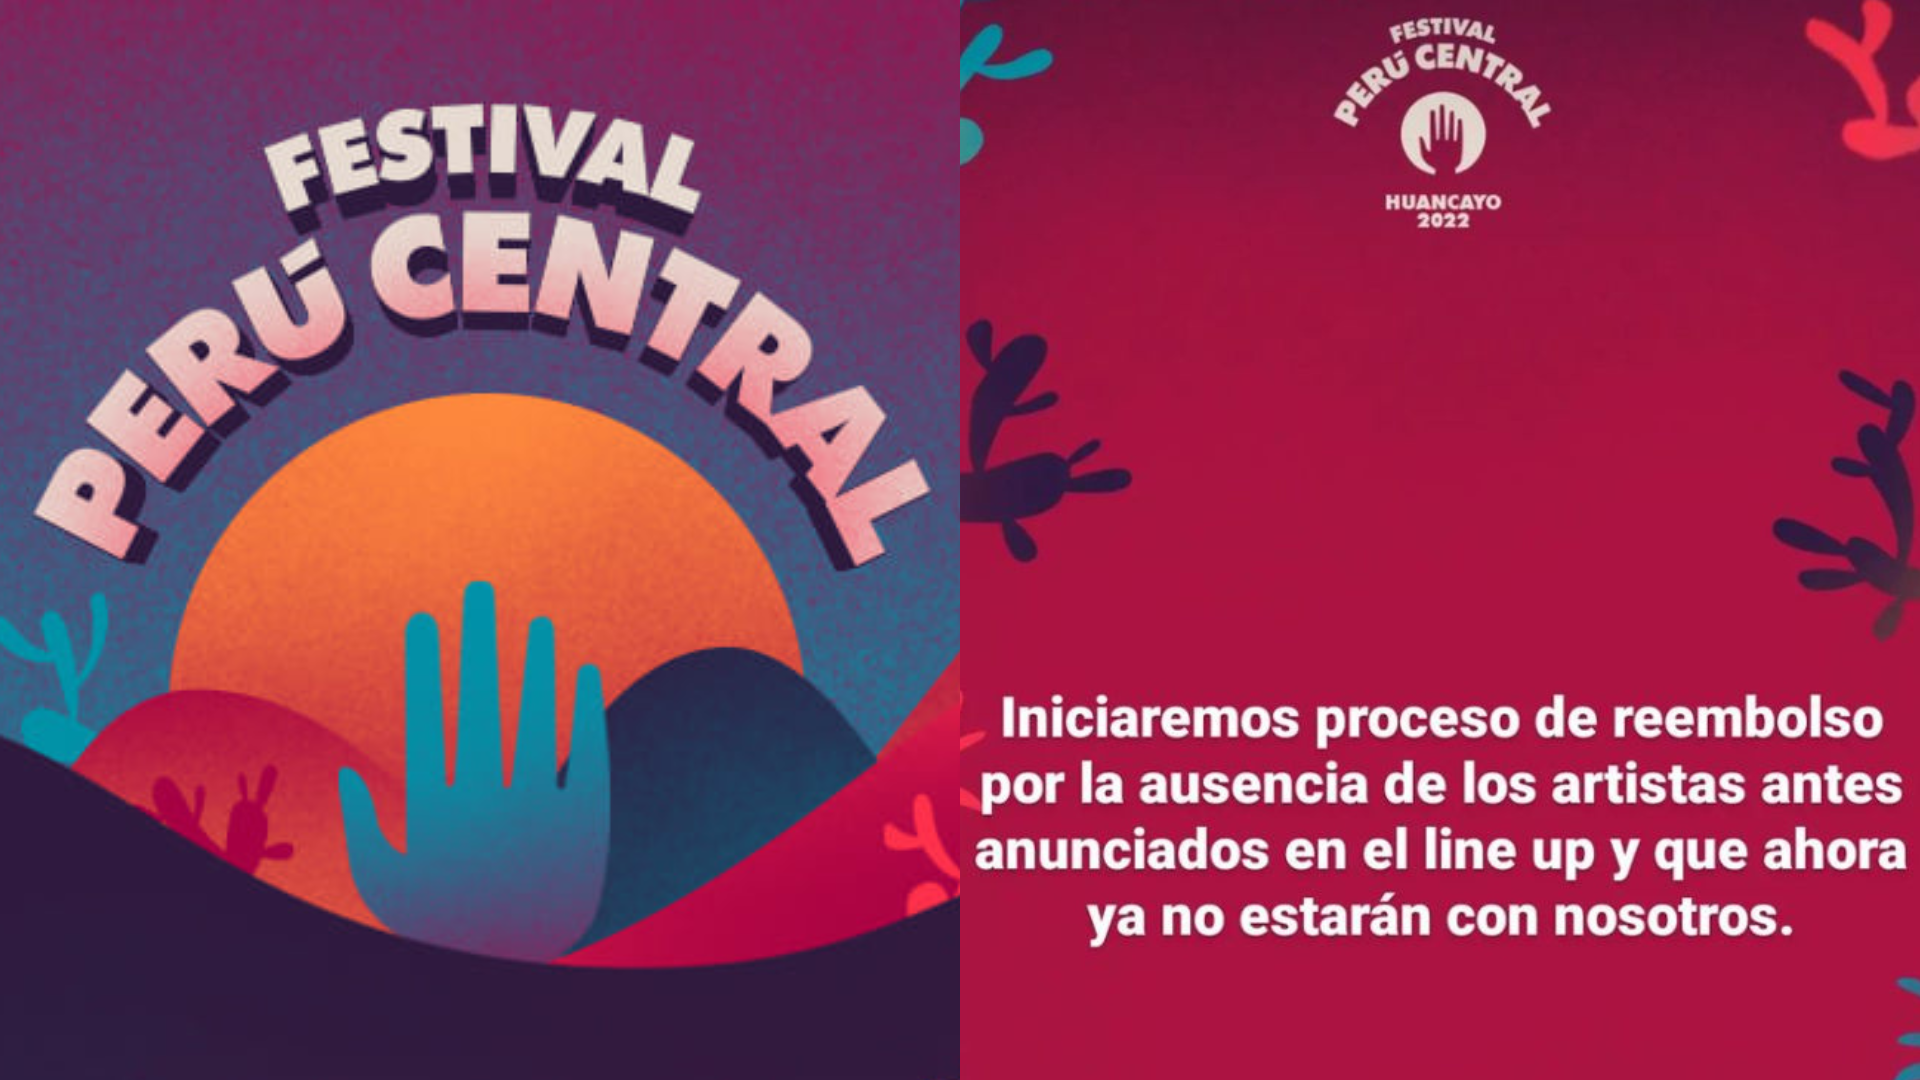 More than 15 bands denounce poor organization and withdraw from the Peru Central Festival in Huancayo